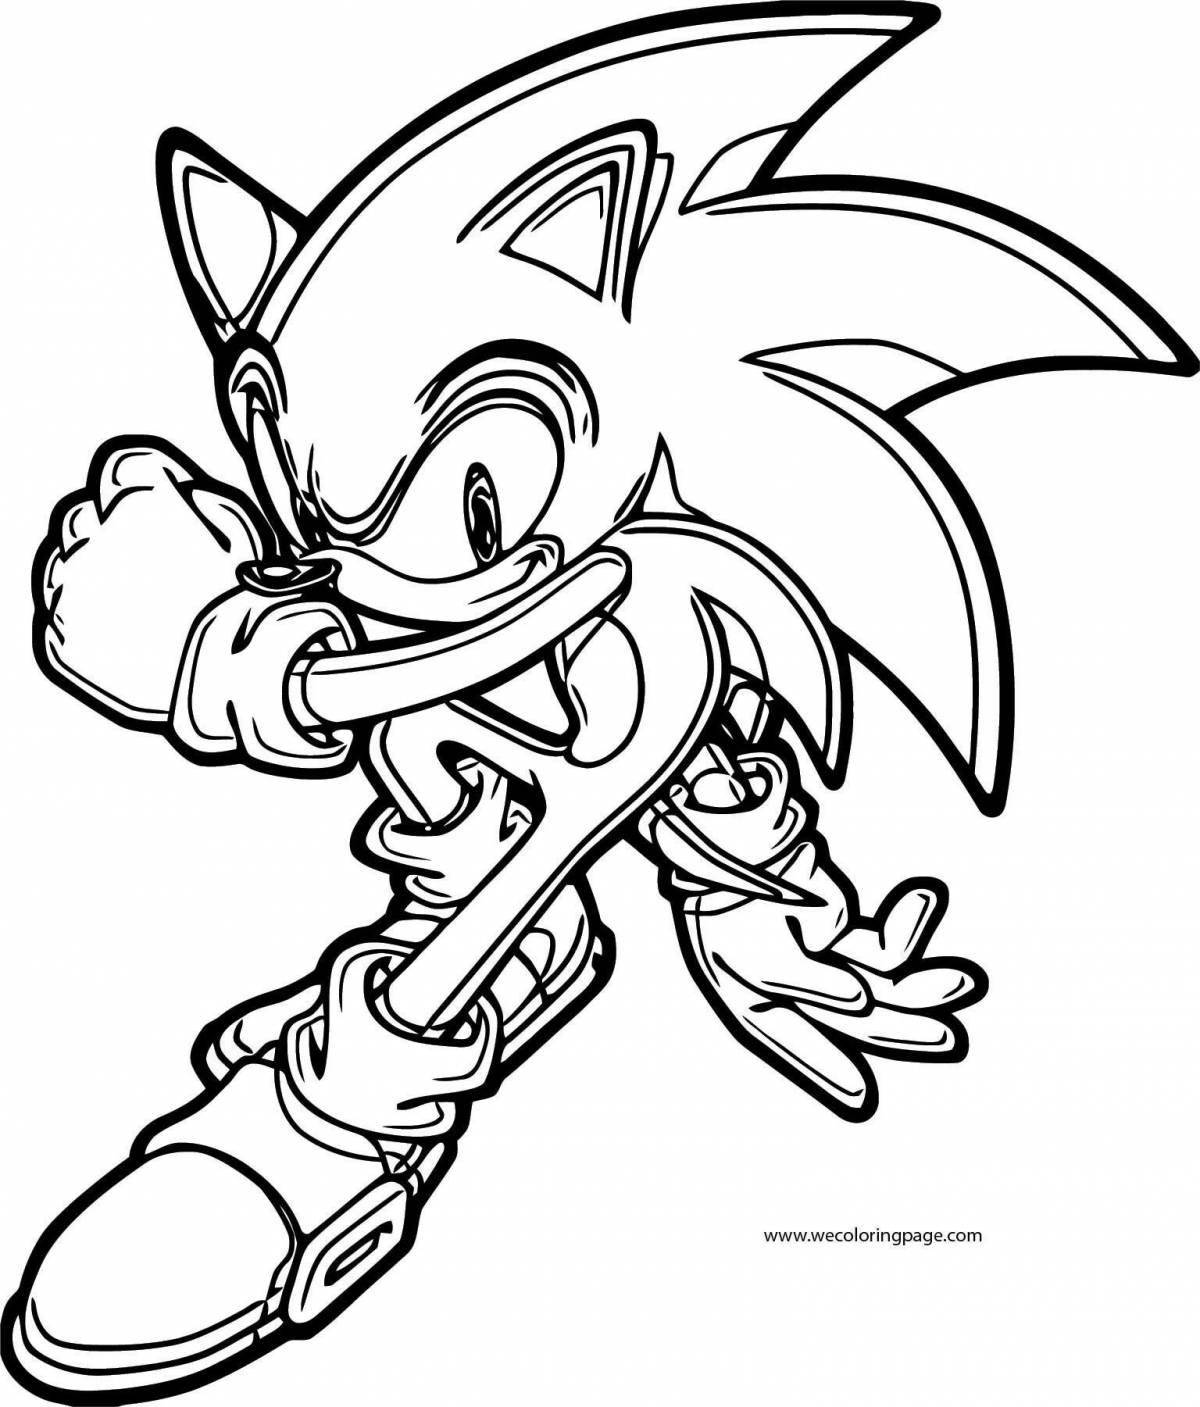 Exciting sonic shredder coloring book